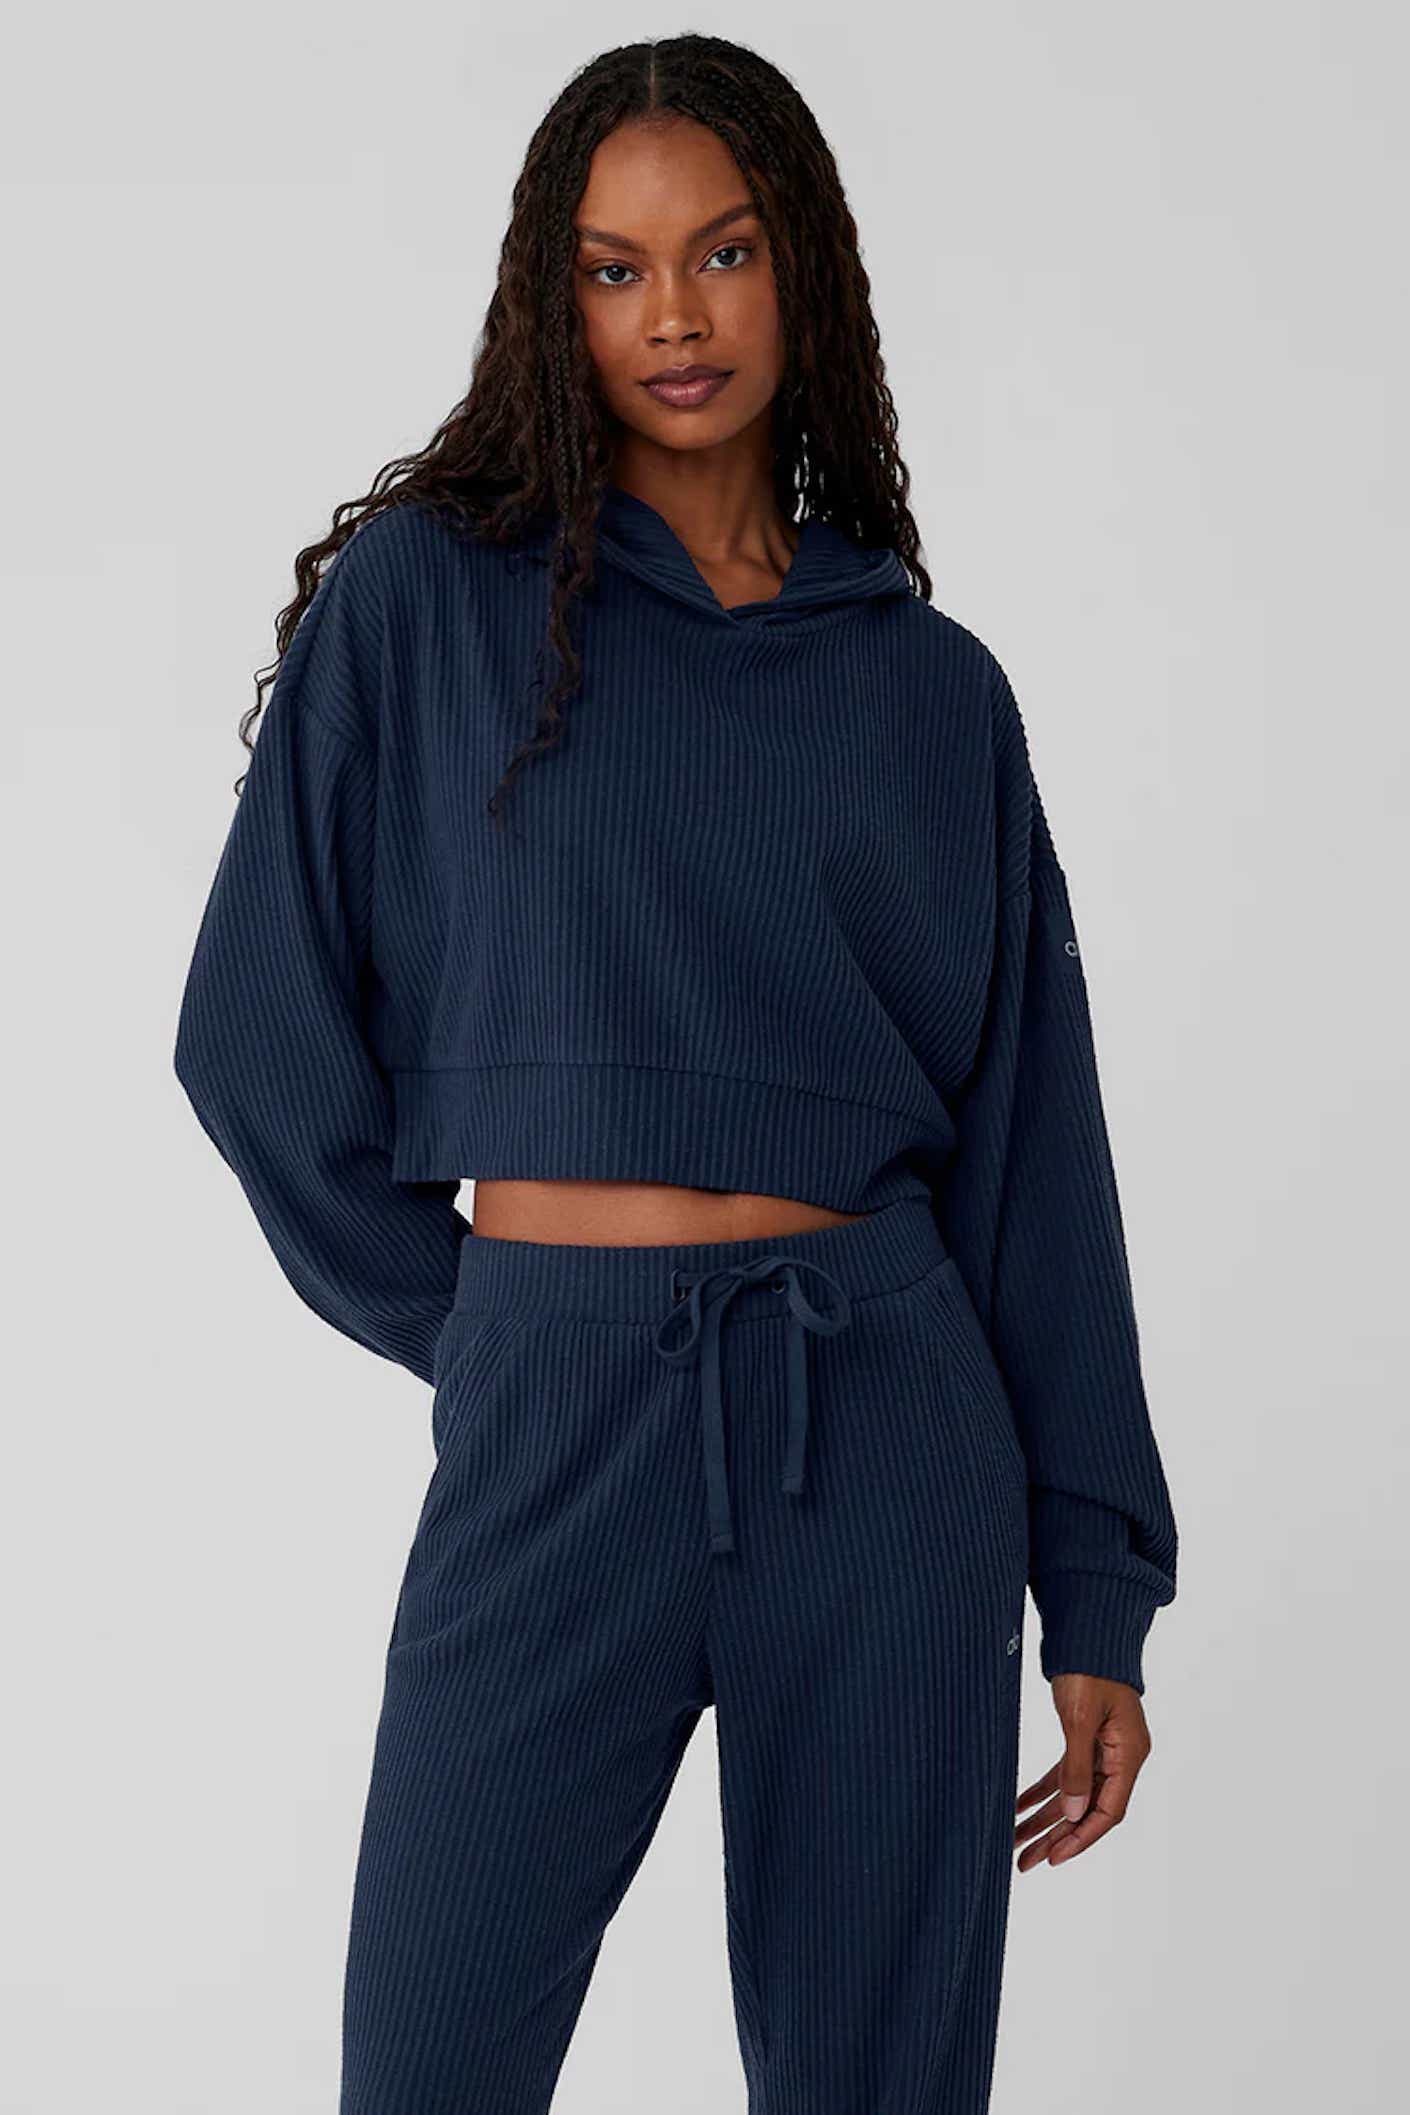 A model wears a navy blue hoodie and sweats.